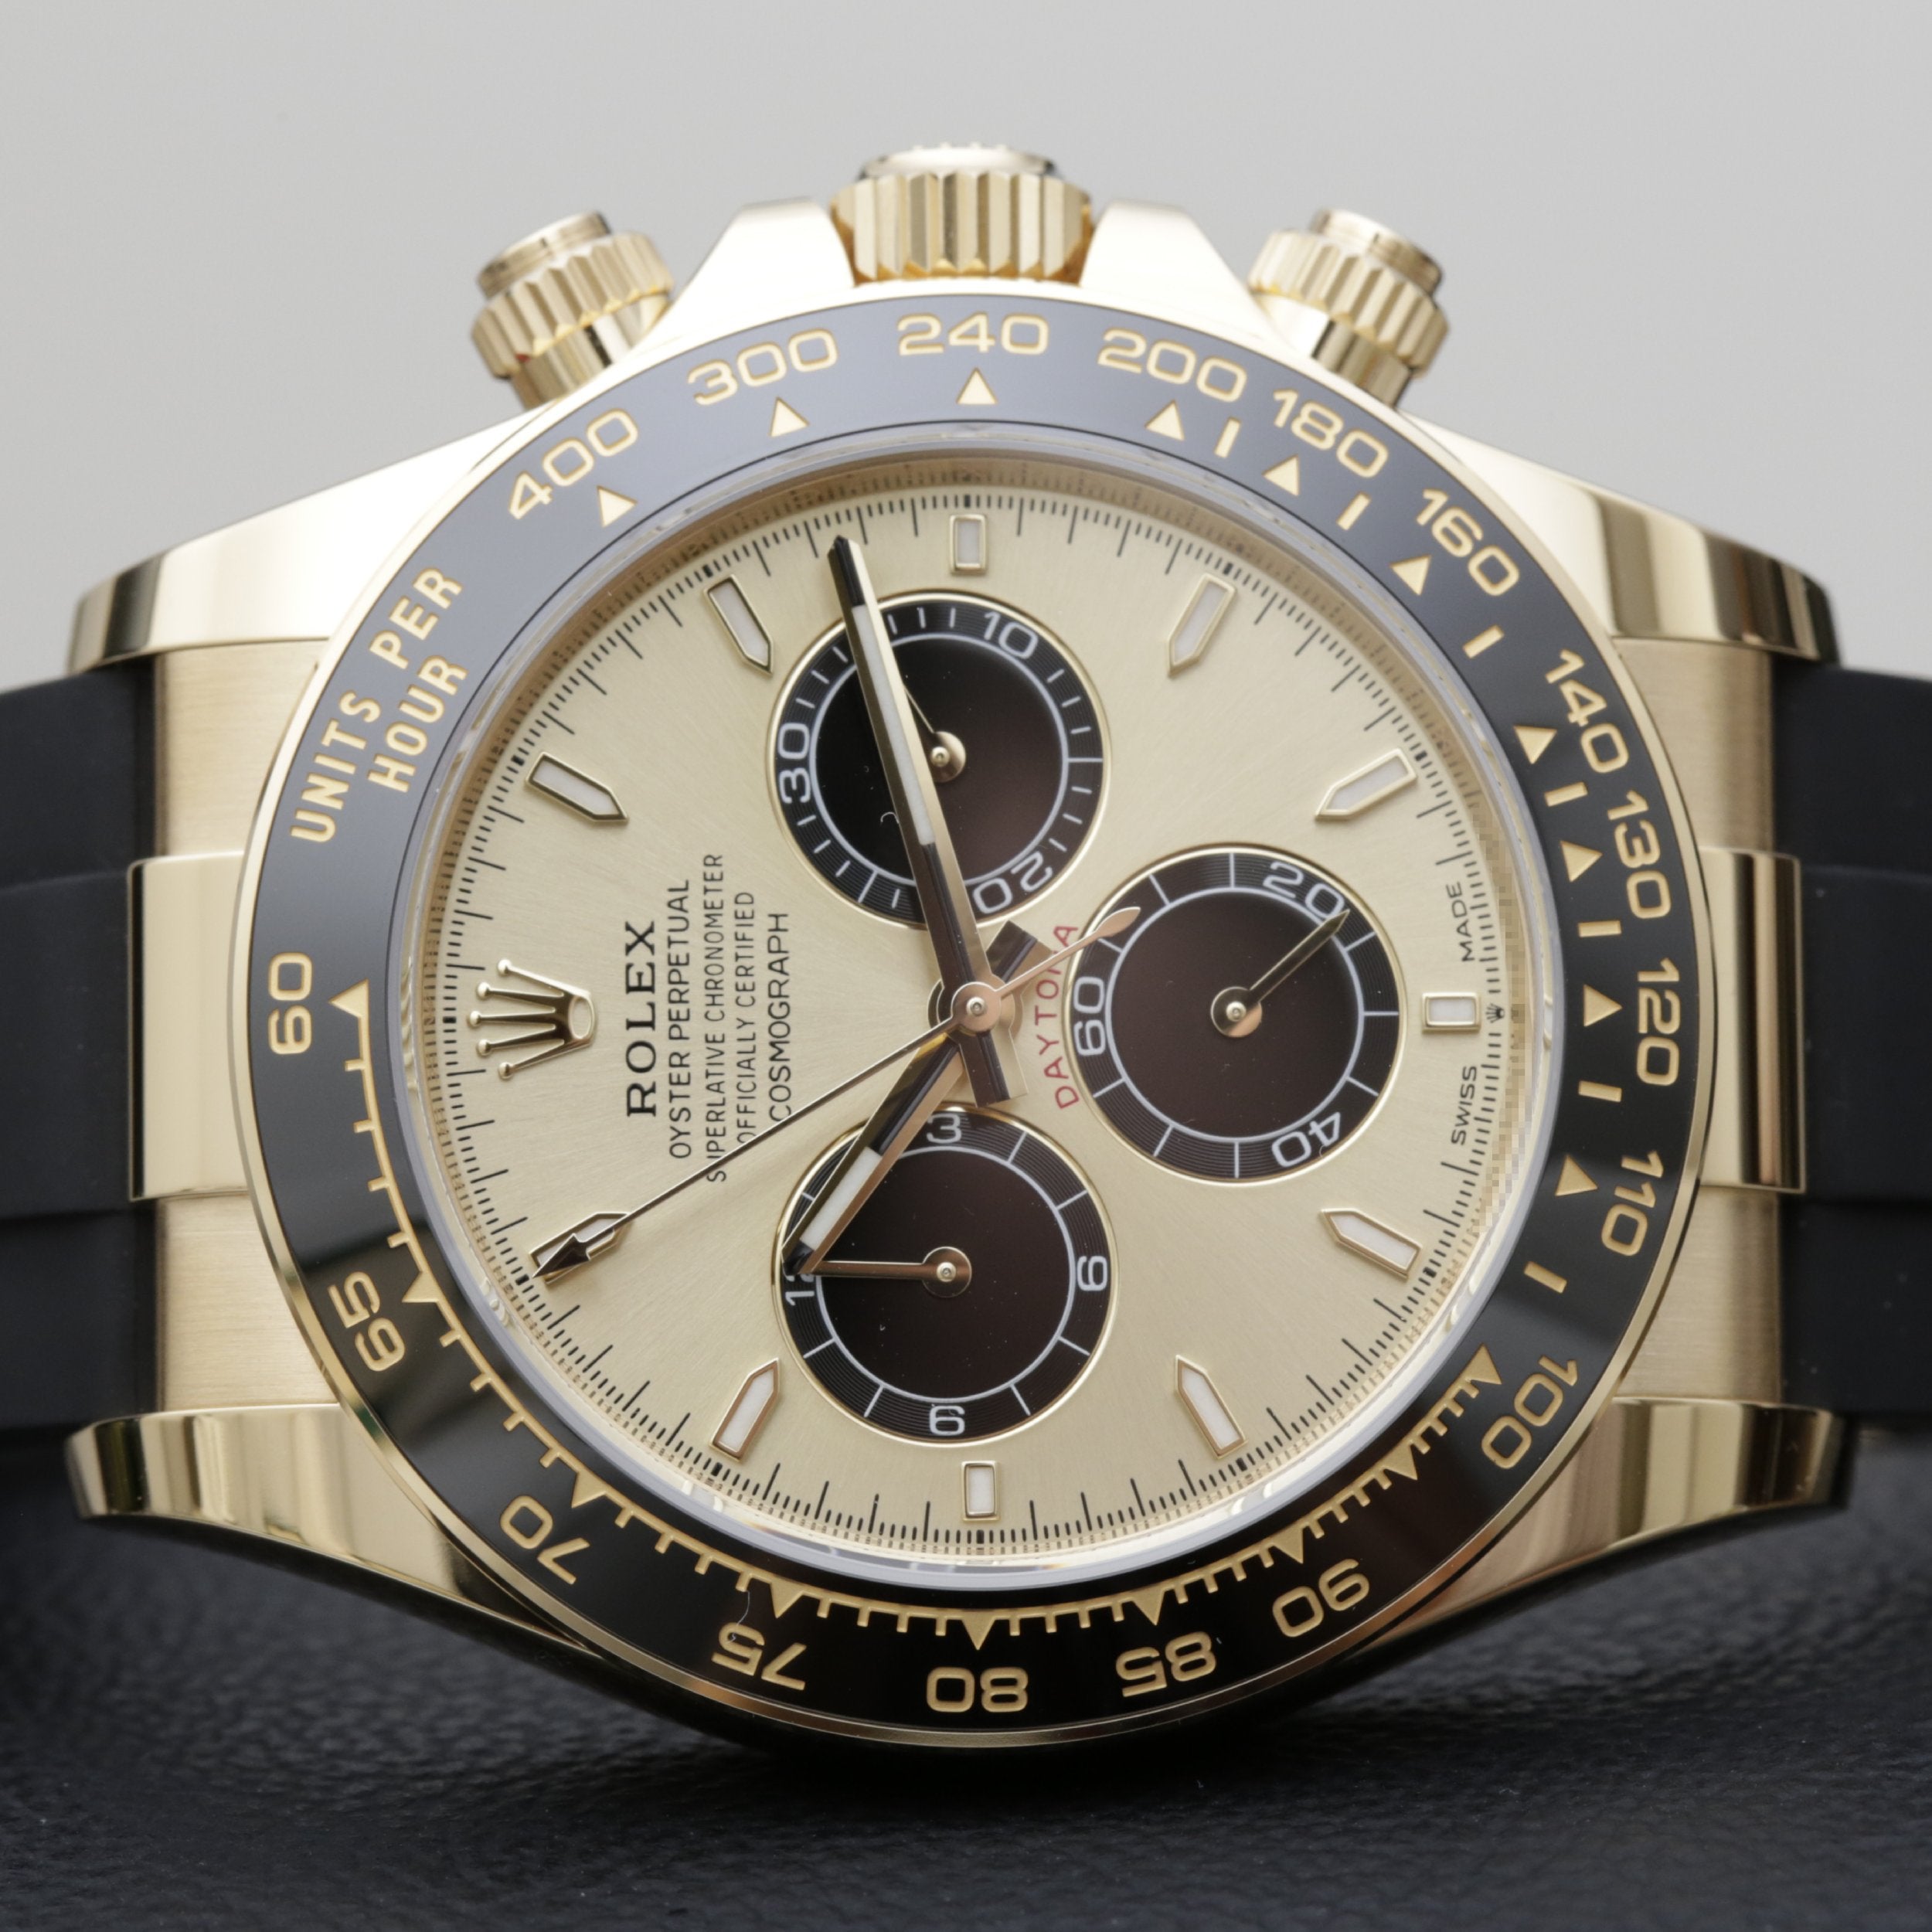 777CHRONOS | Buy, sell and trade pre-owned luxury watches – 777CRHONOS